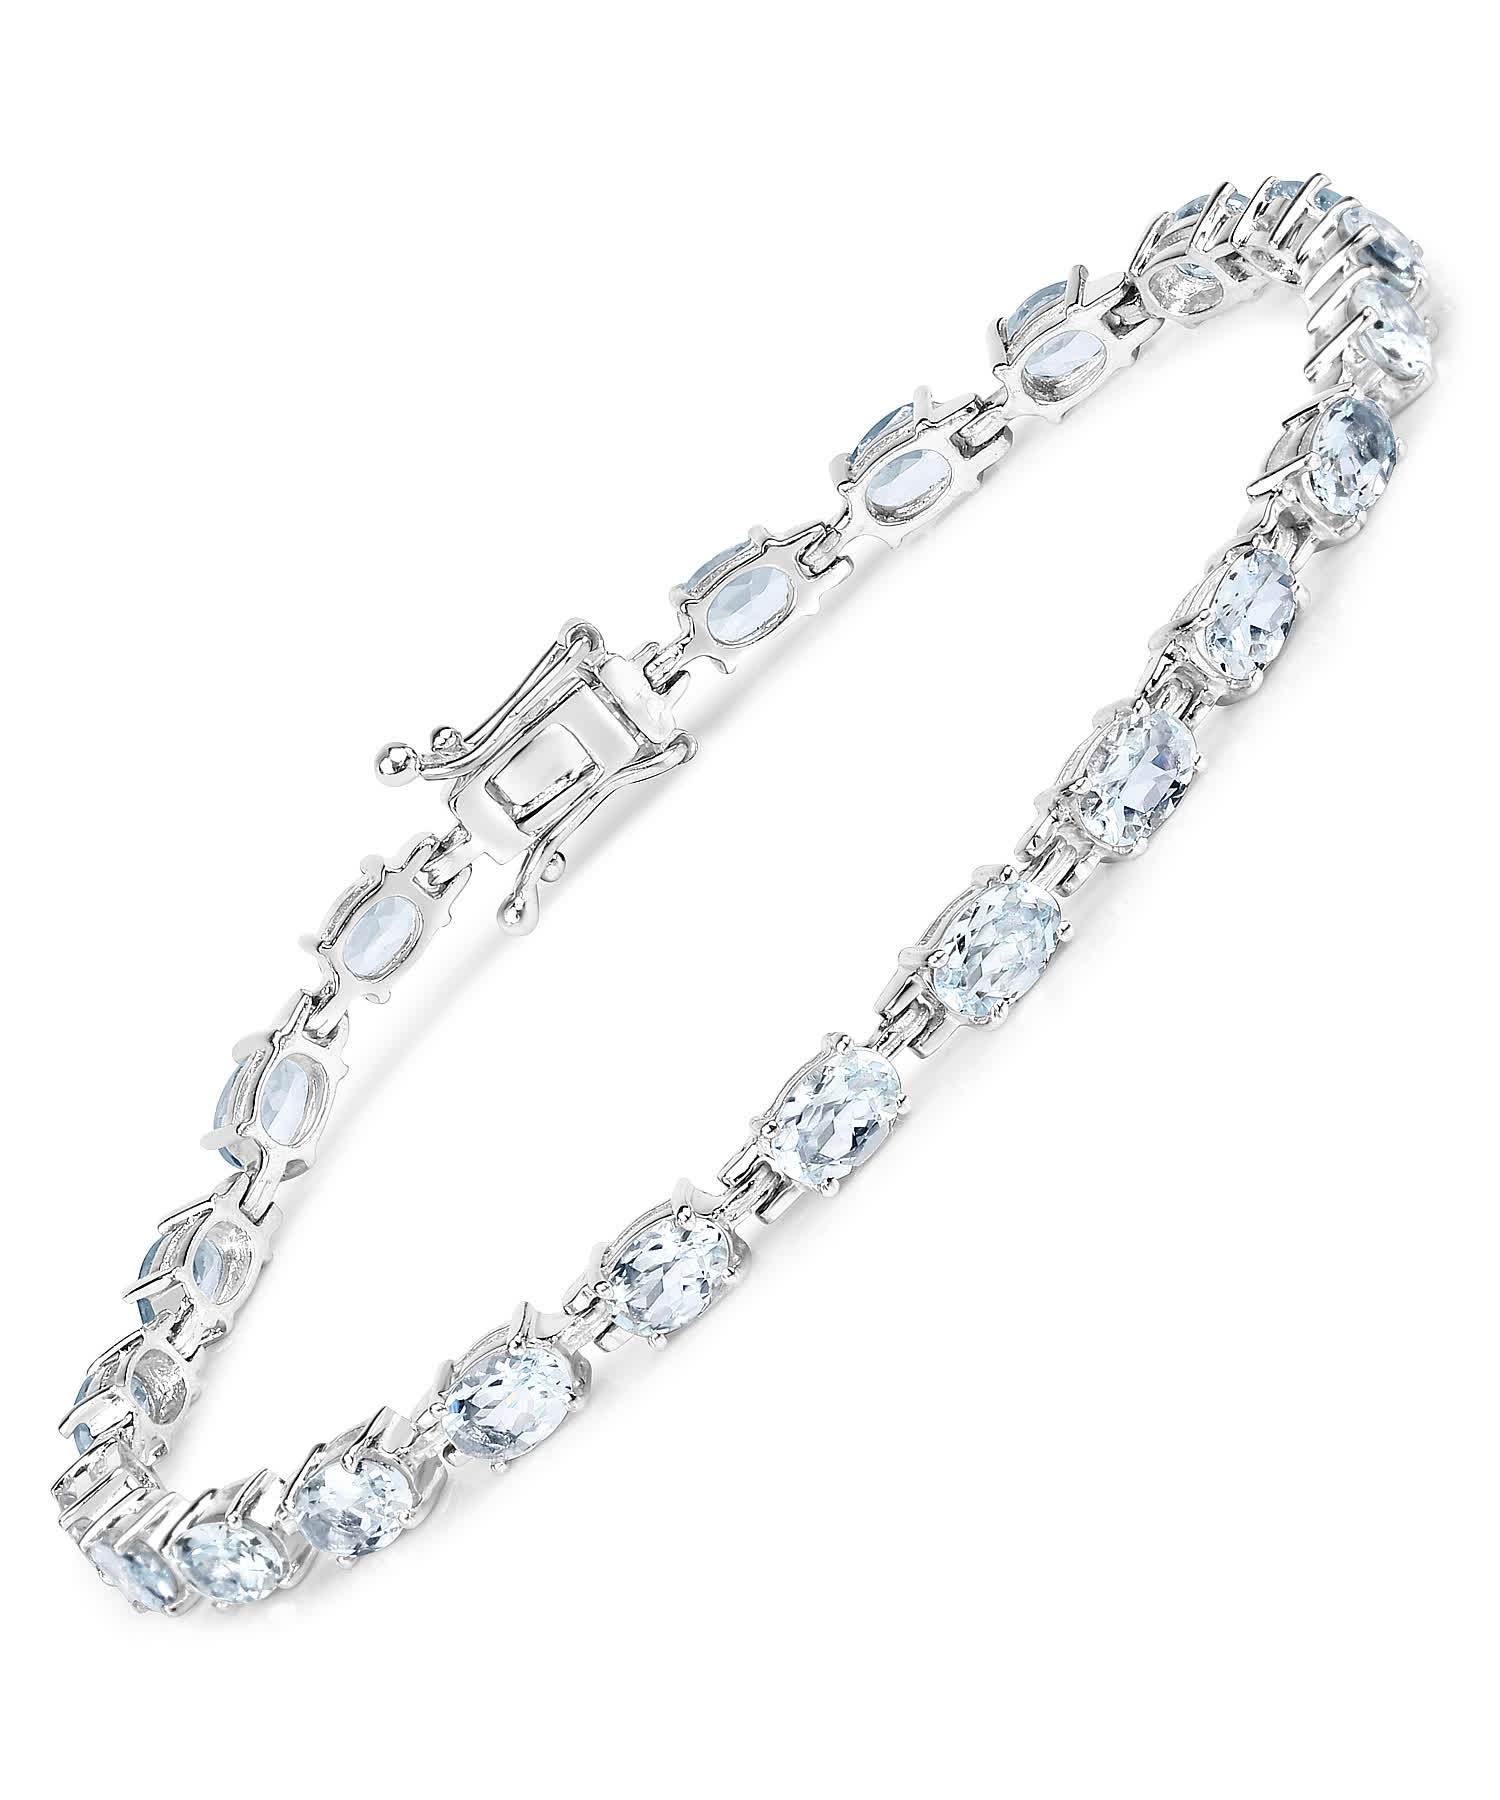 8.80ctw Natural Icy Sky Blue Aquamarine Rhodium Plated 925 Sterling Silver Tennis Bracelet View 1